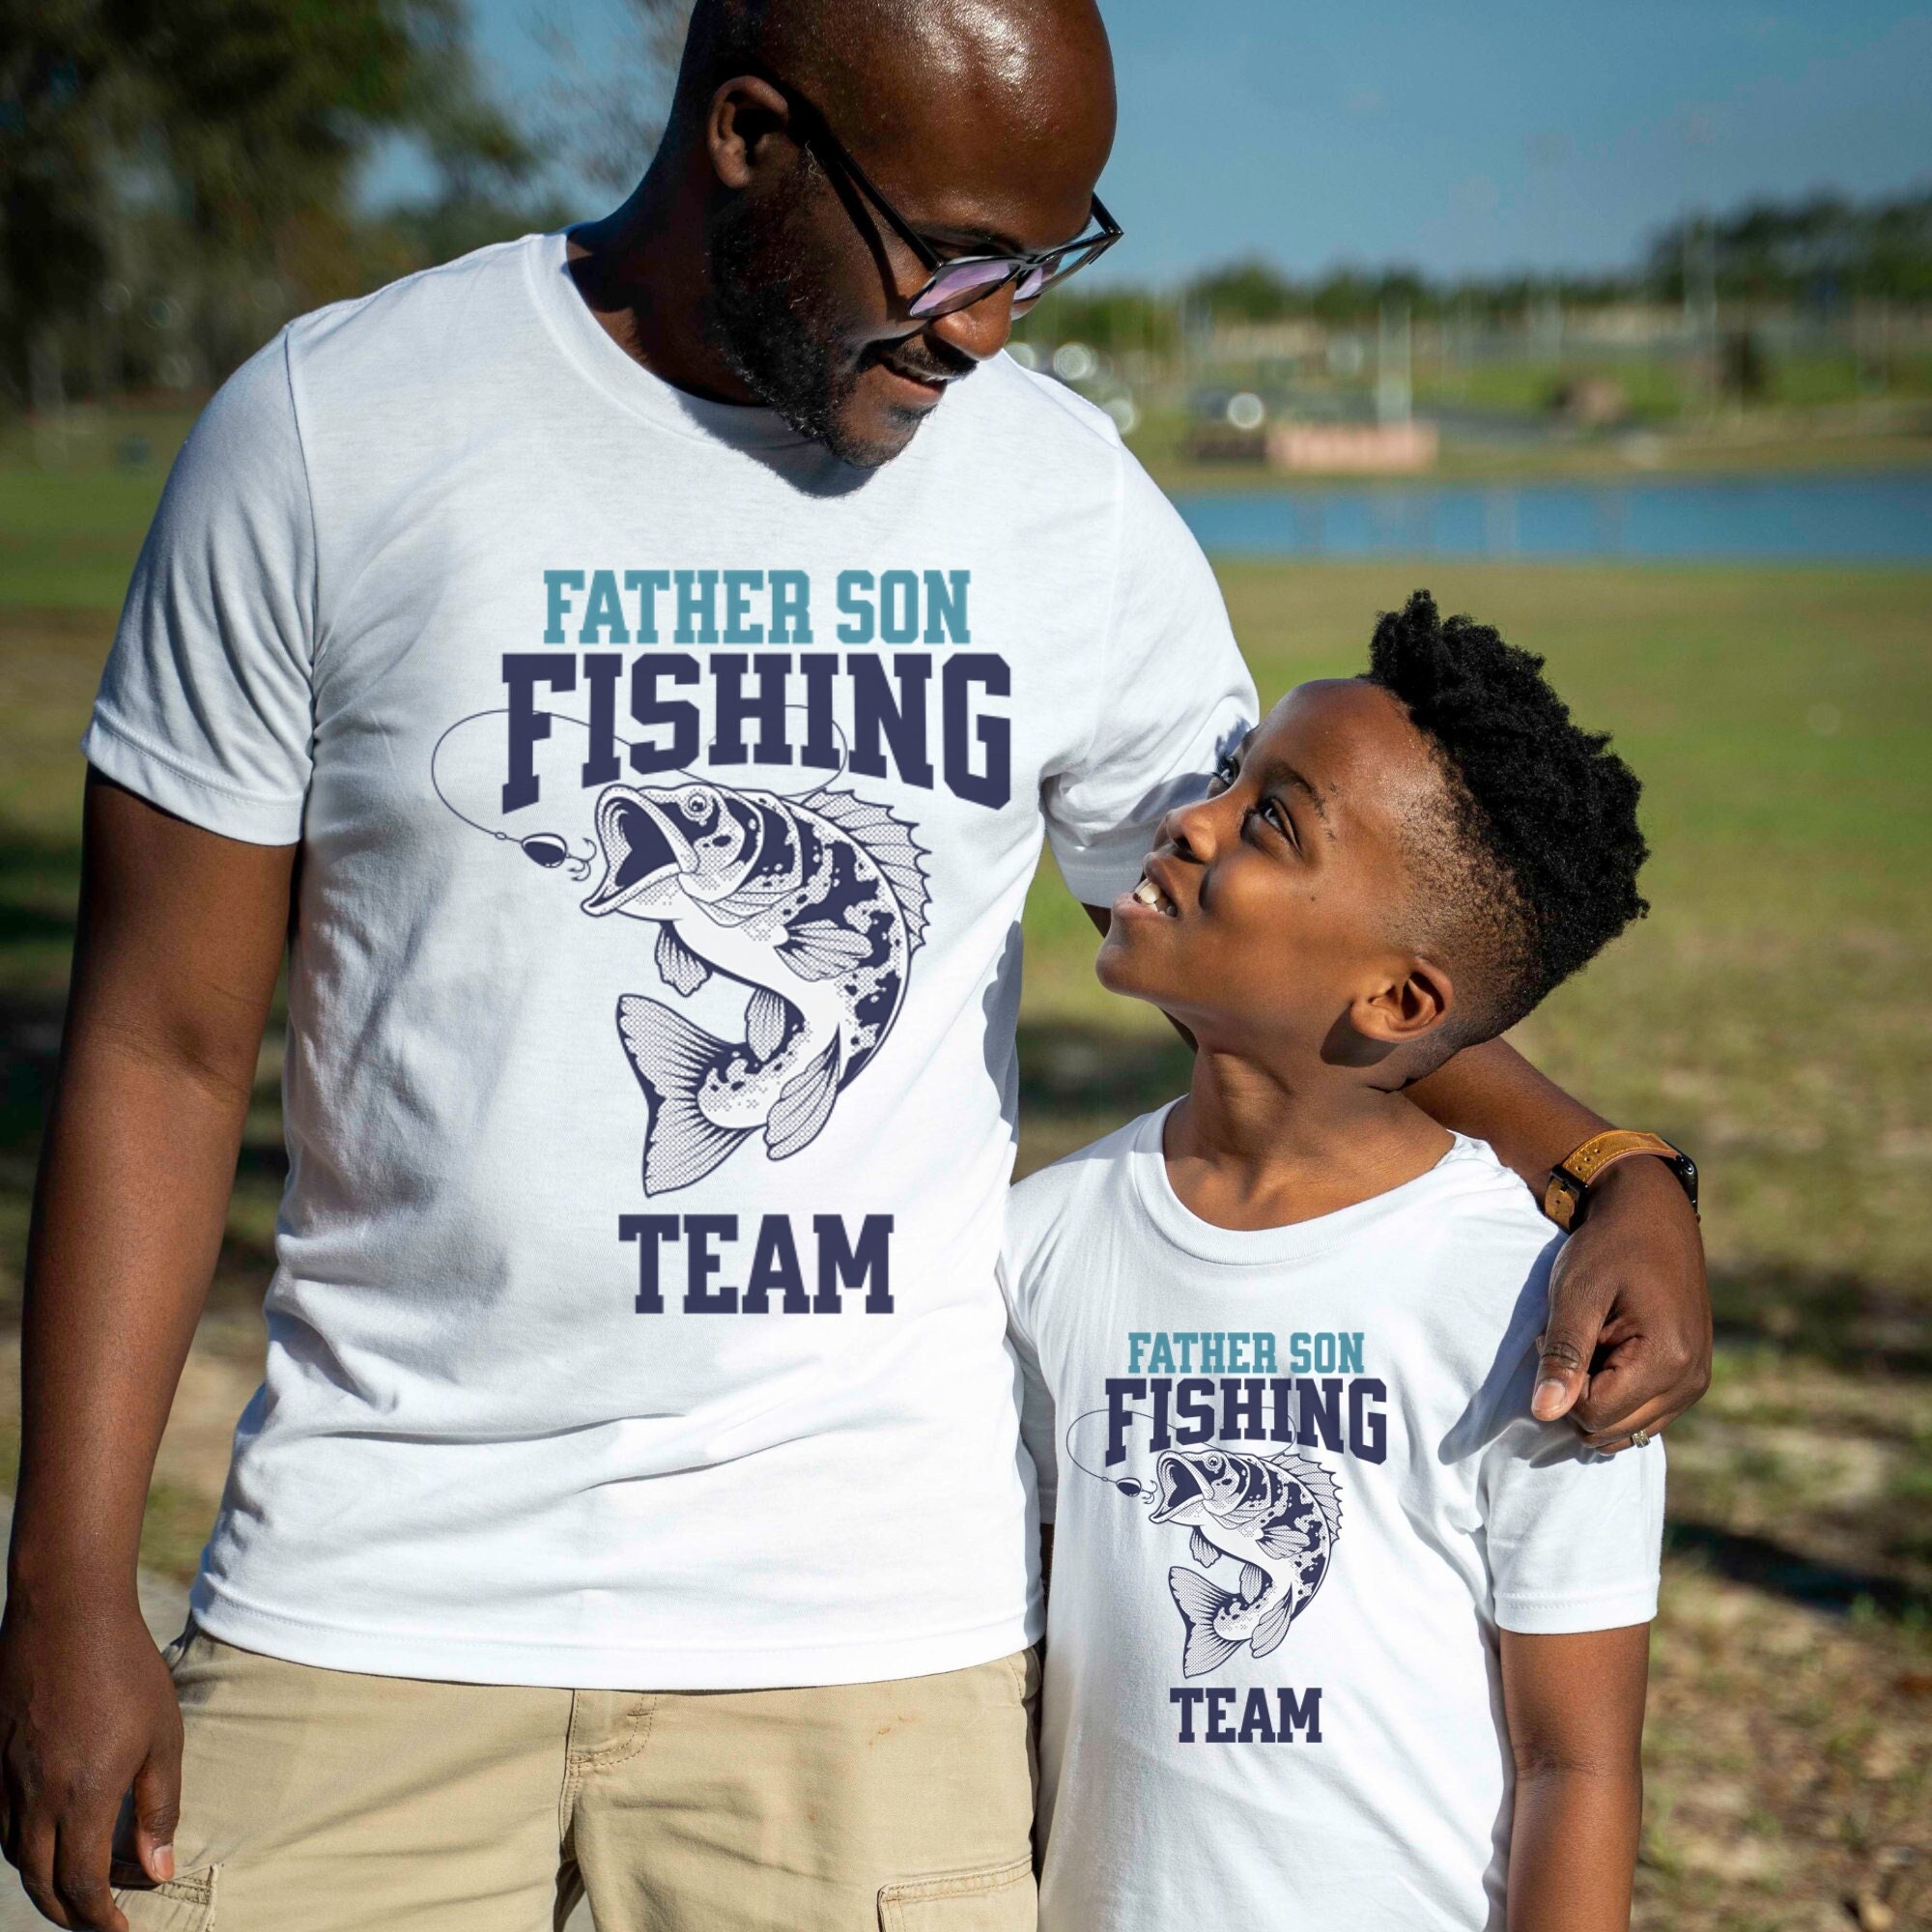 Father Son Fishing Shirts Matching Father and Son Fishing, Father Son  Fishing T, Father and Son Fishing Tshirt, . Father's Day, Fathers Days -   Sweden